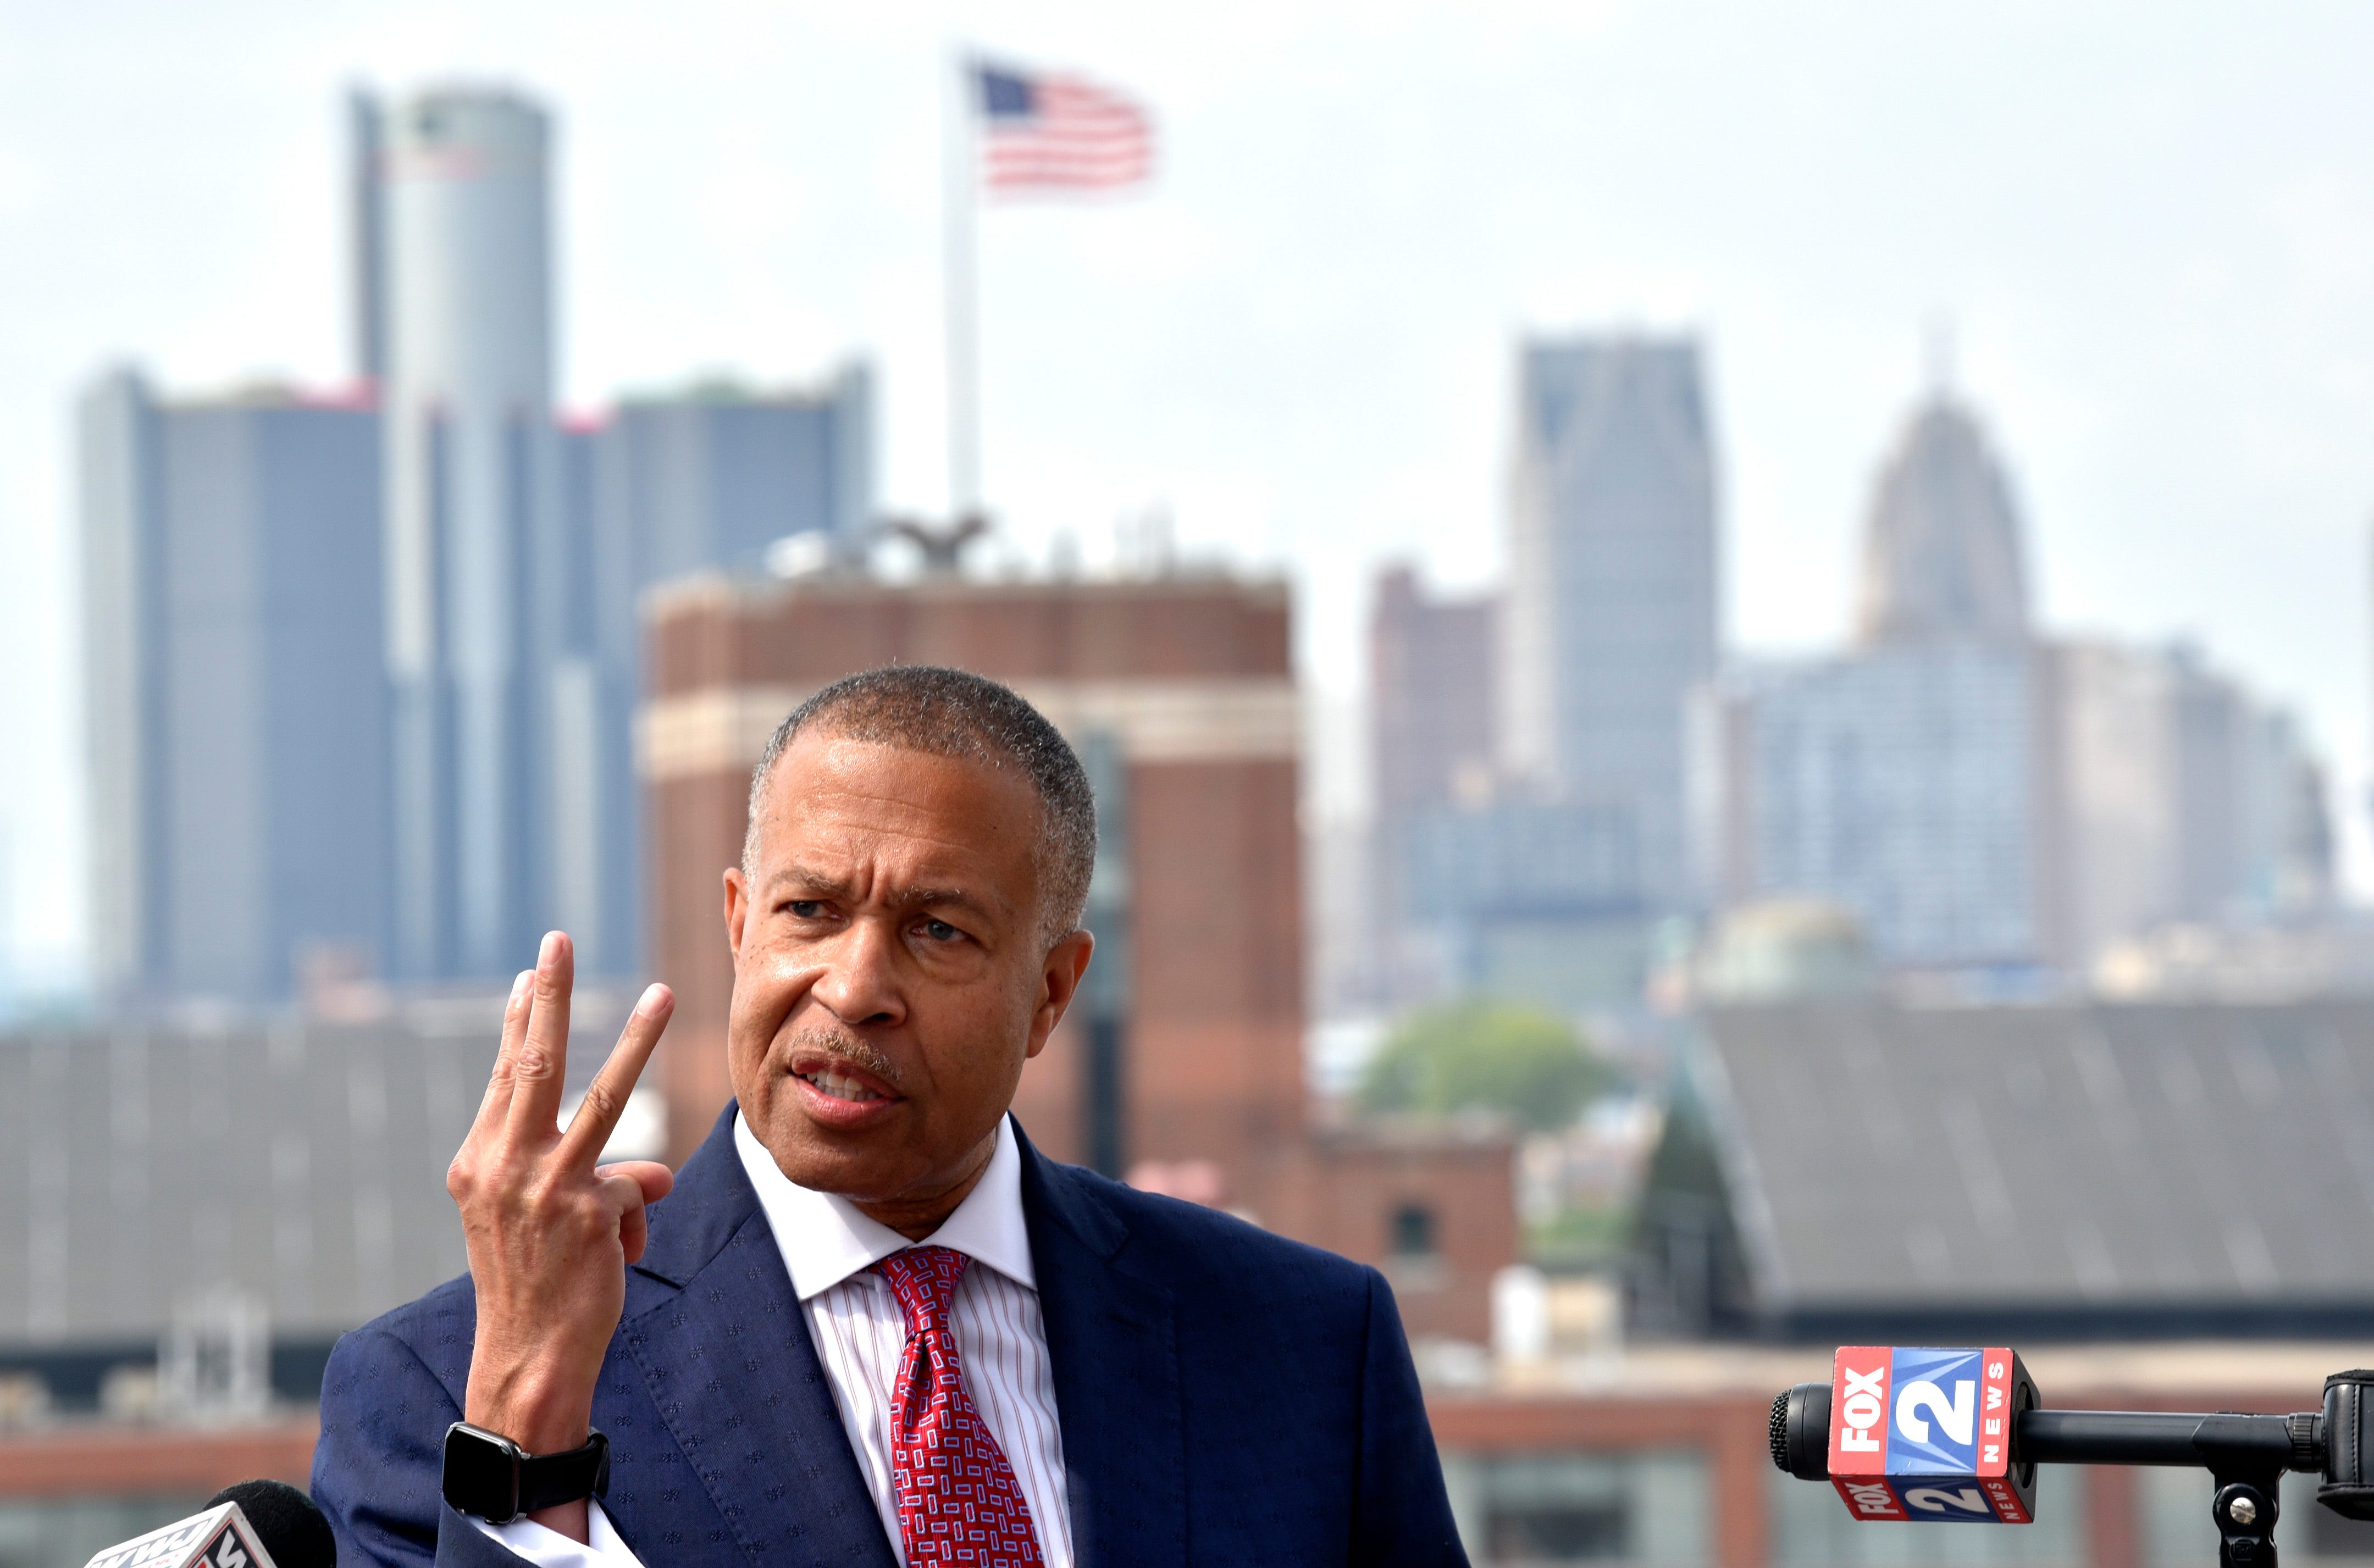 Former Detroit Police Chief James Craig raises three fingers and says he's worked in law enforcement in three cities over 44 years as he stands in front of the Detroit skyline and announces his Republican candidacy for Michigan governor, Tuesday afternoon, September 14 ,2021.